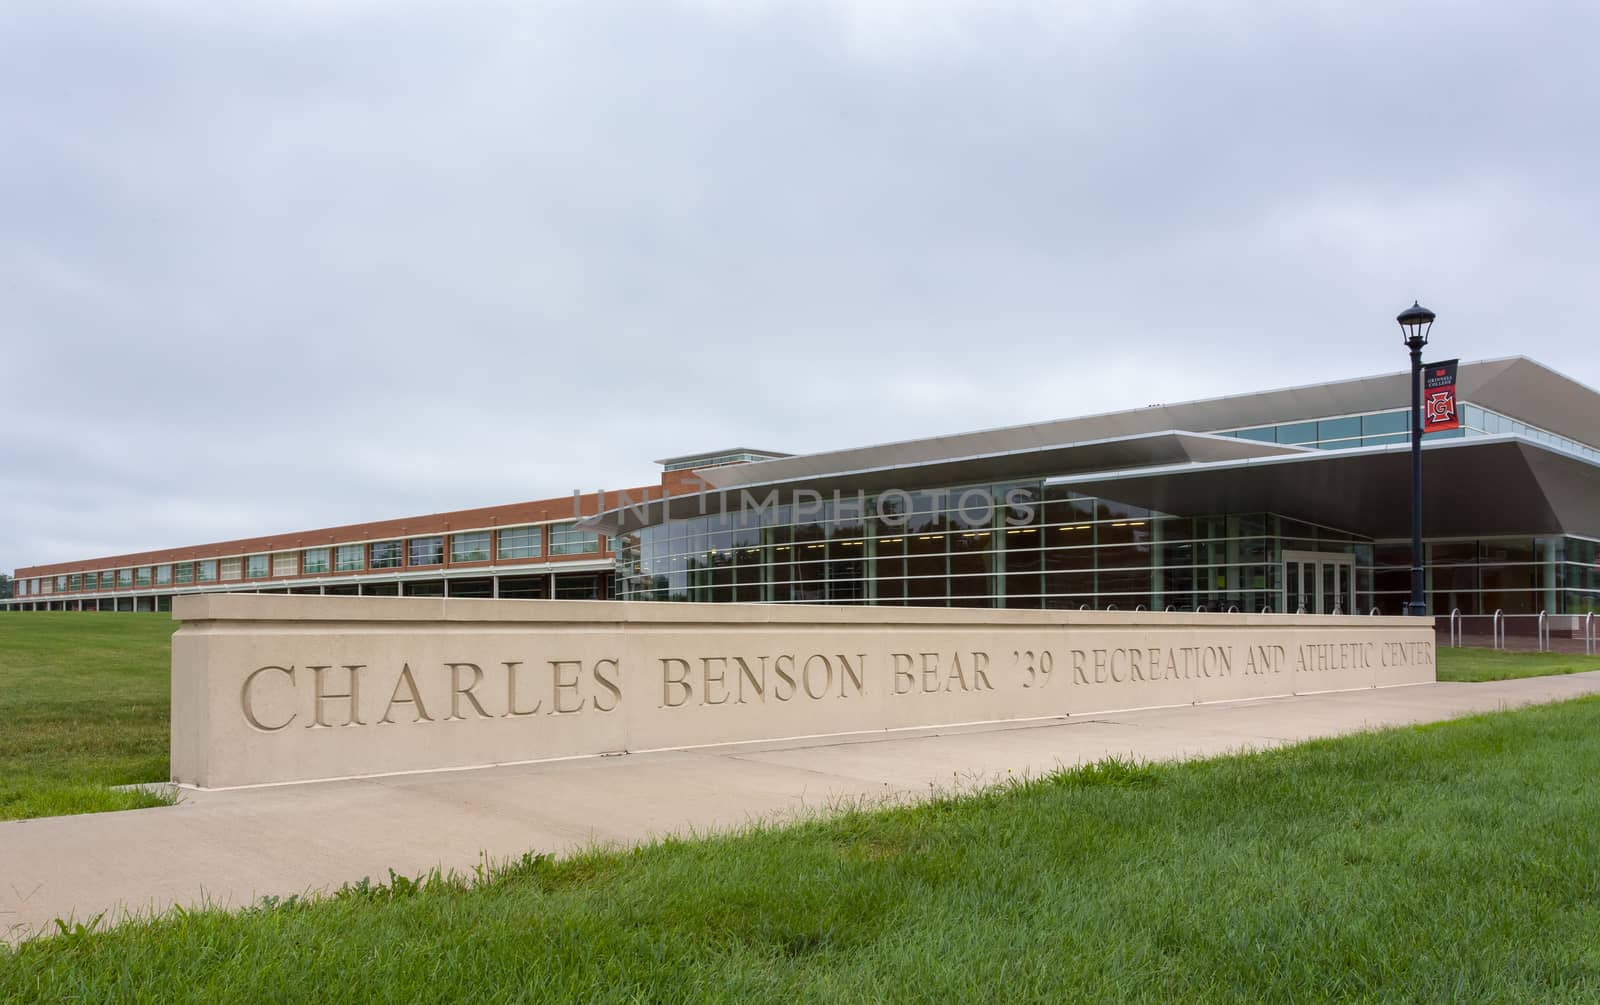 GRINNELL, IA/USA - AUGUST 8, 2015: Charles Benson Bear Recreation Center on the campus of Grinell College. Grinnell College is a private liberal arts college  known for its rigorous academics and tradition of social responsibility.